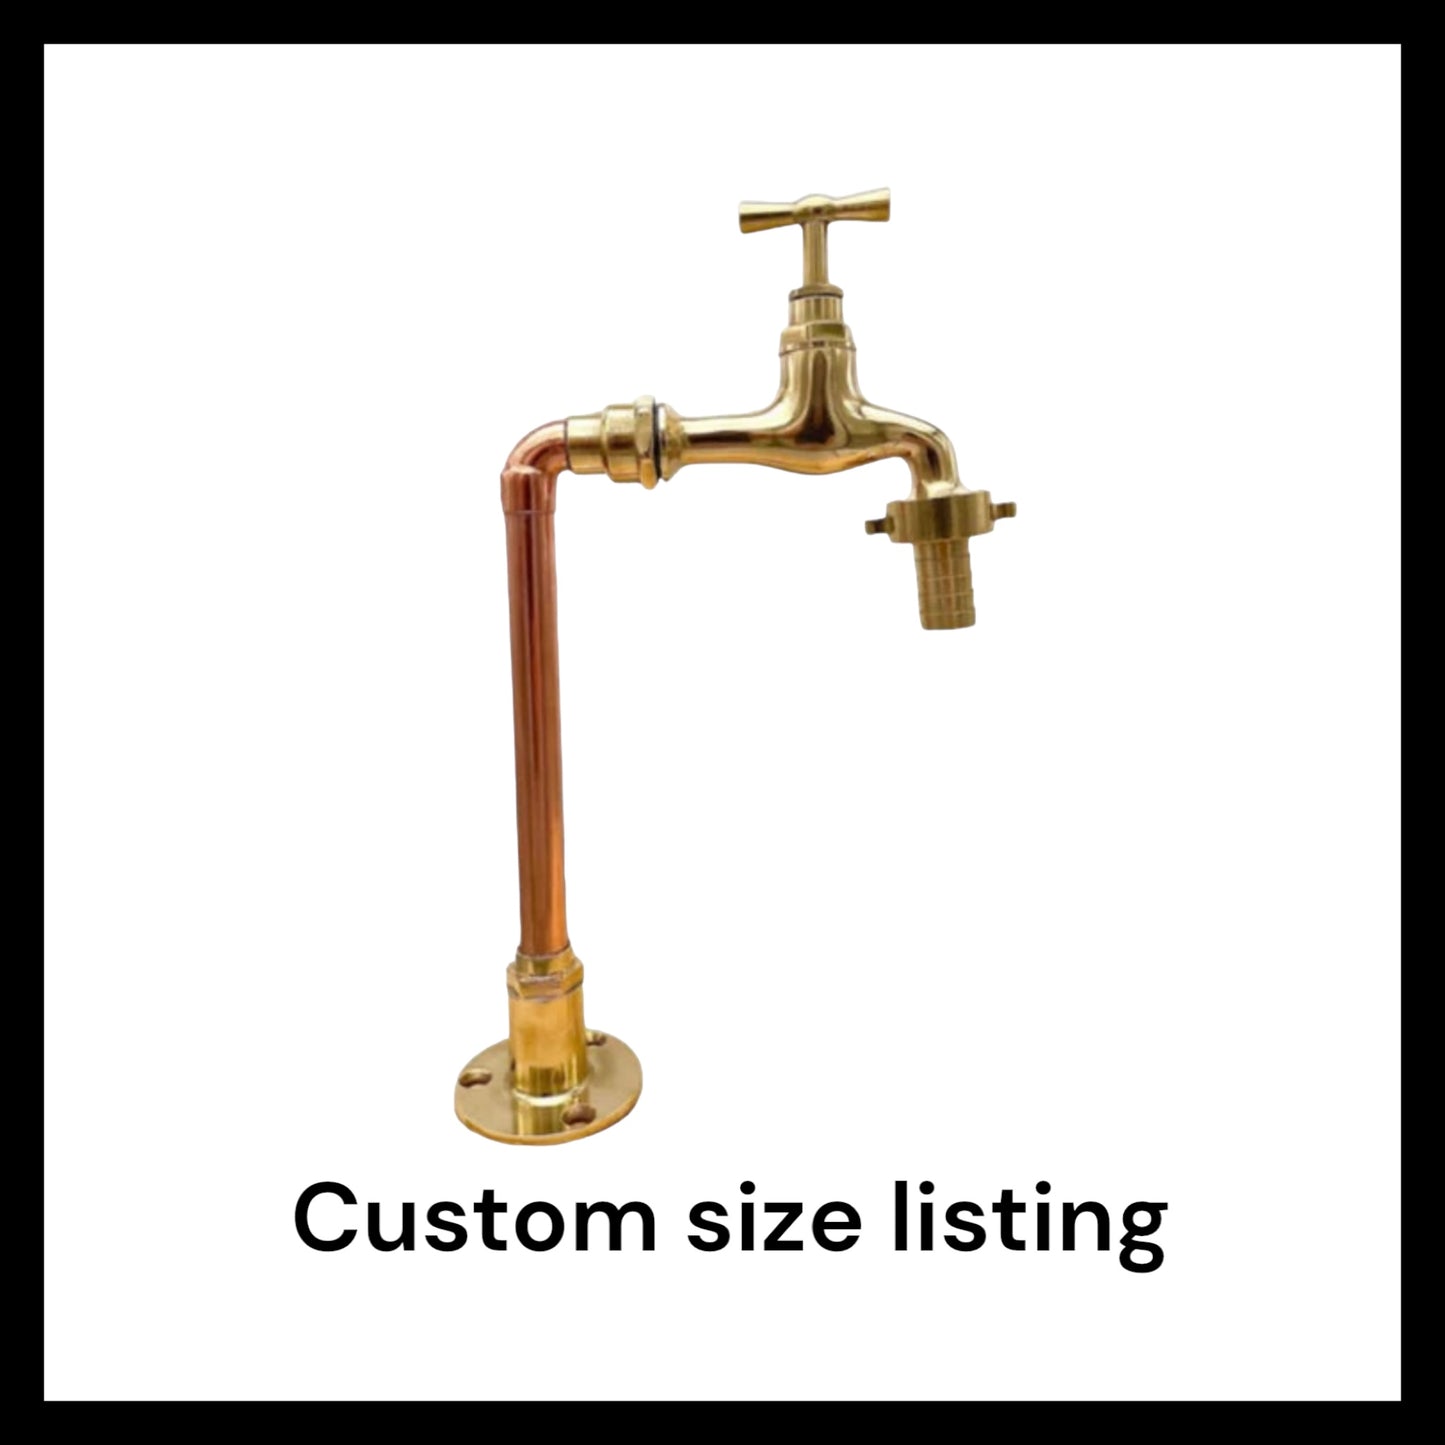 Custom Made to Measure Vintage Style Copper and Brass Handmade Pillar Tap, ideal for a Belfast sink (T12)